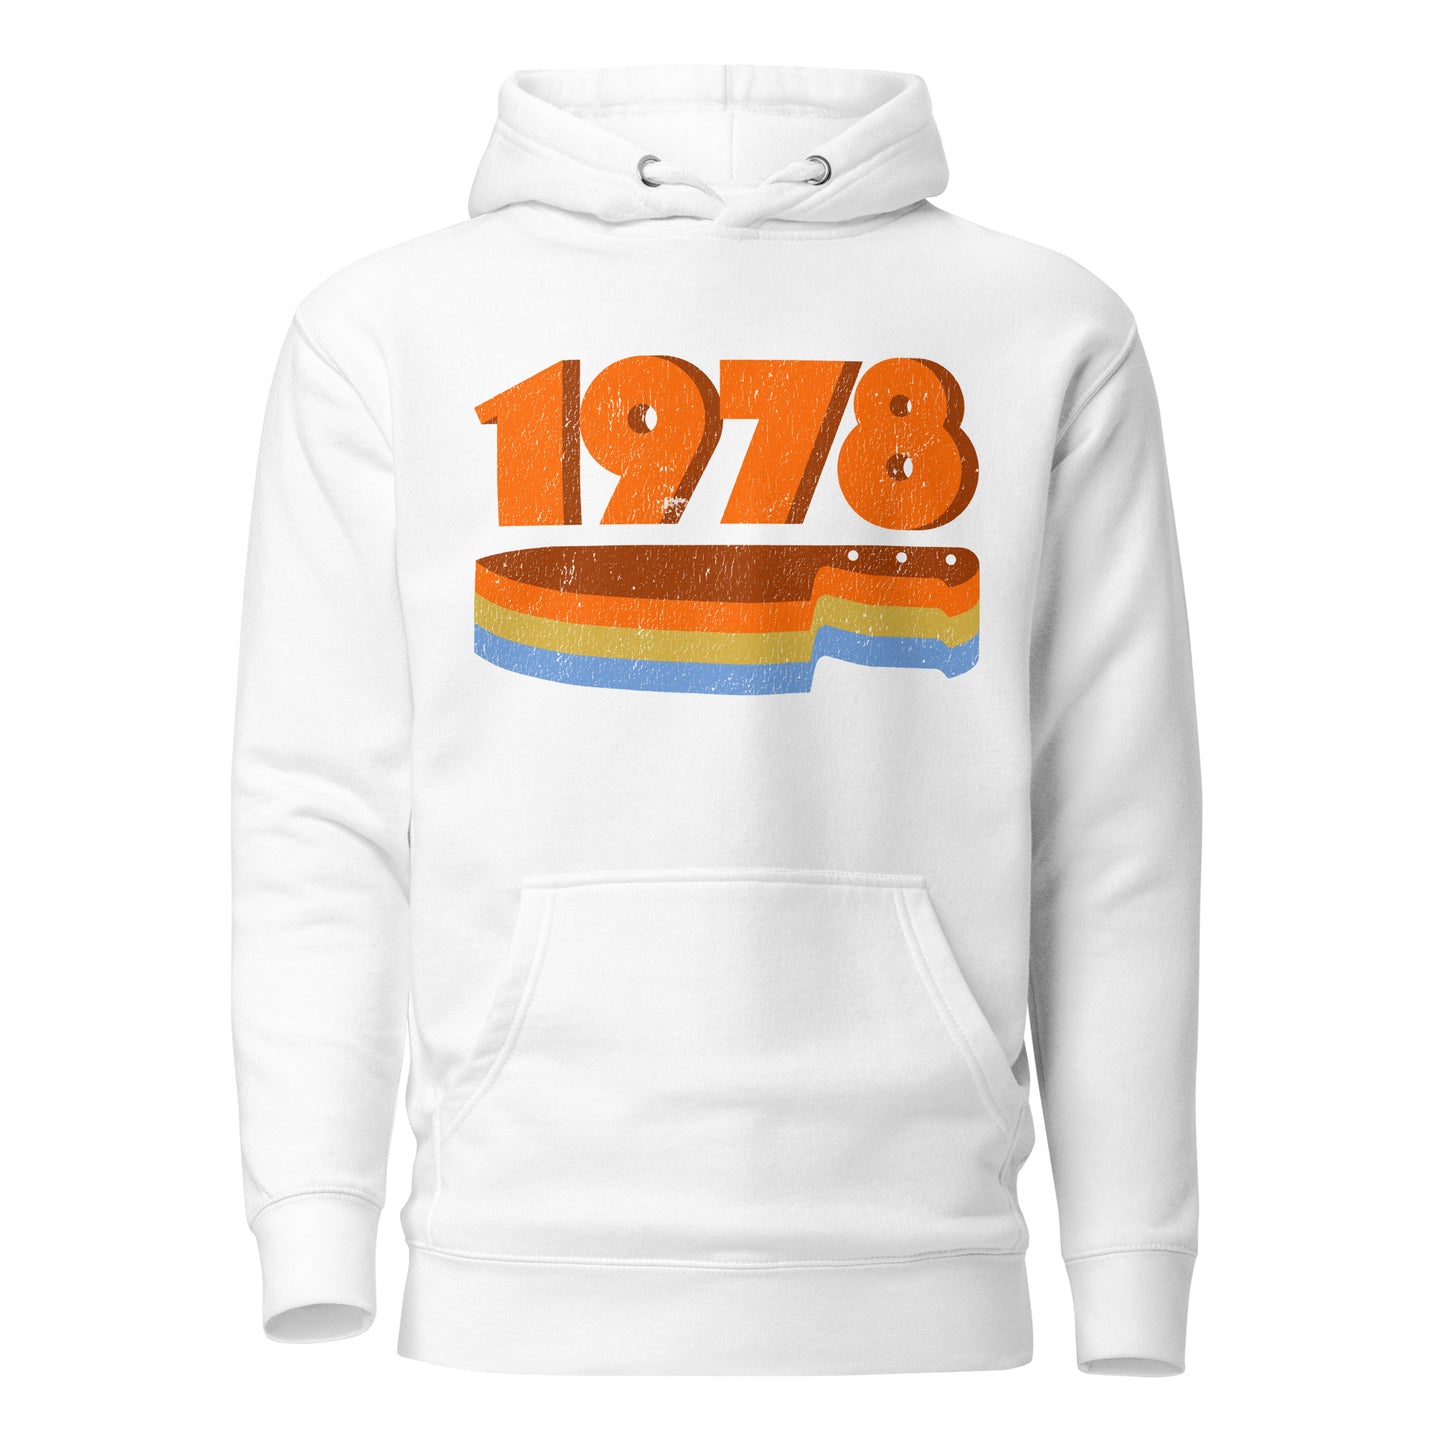 October 31st 1978 pullover hoodie